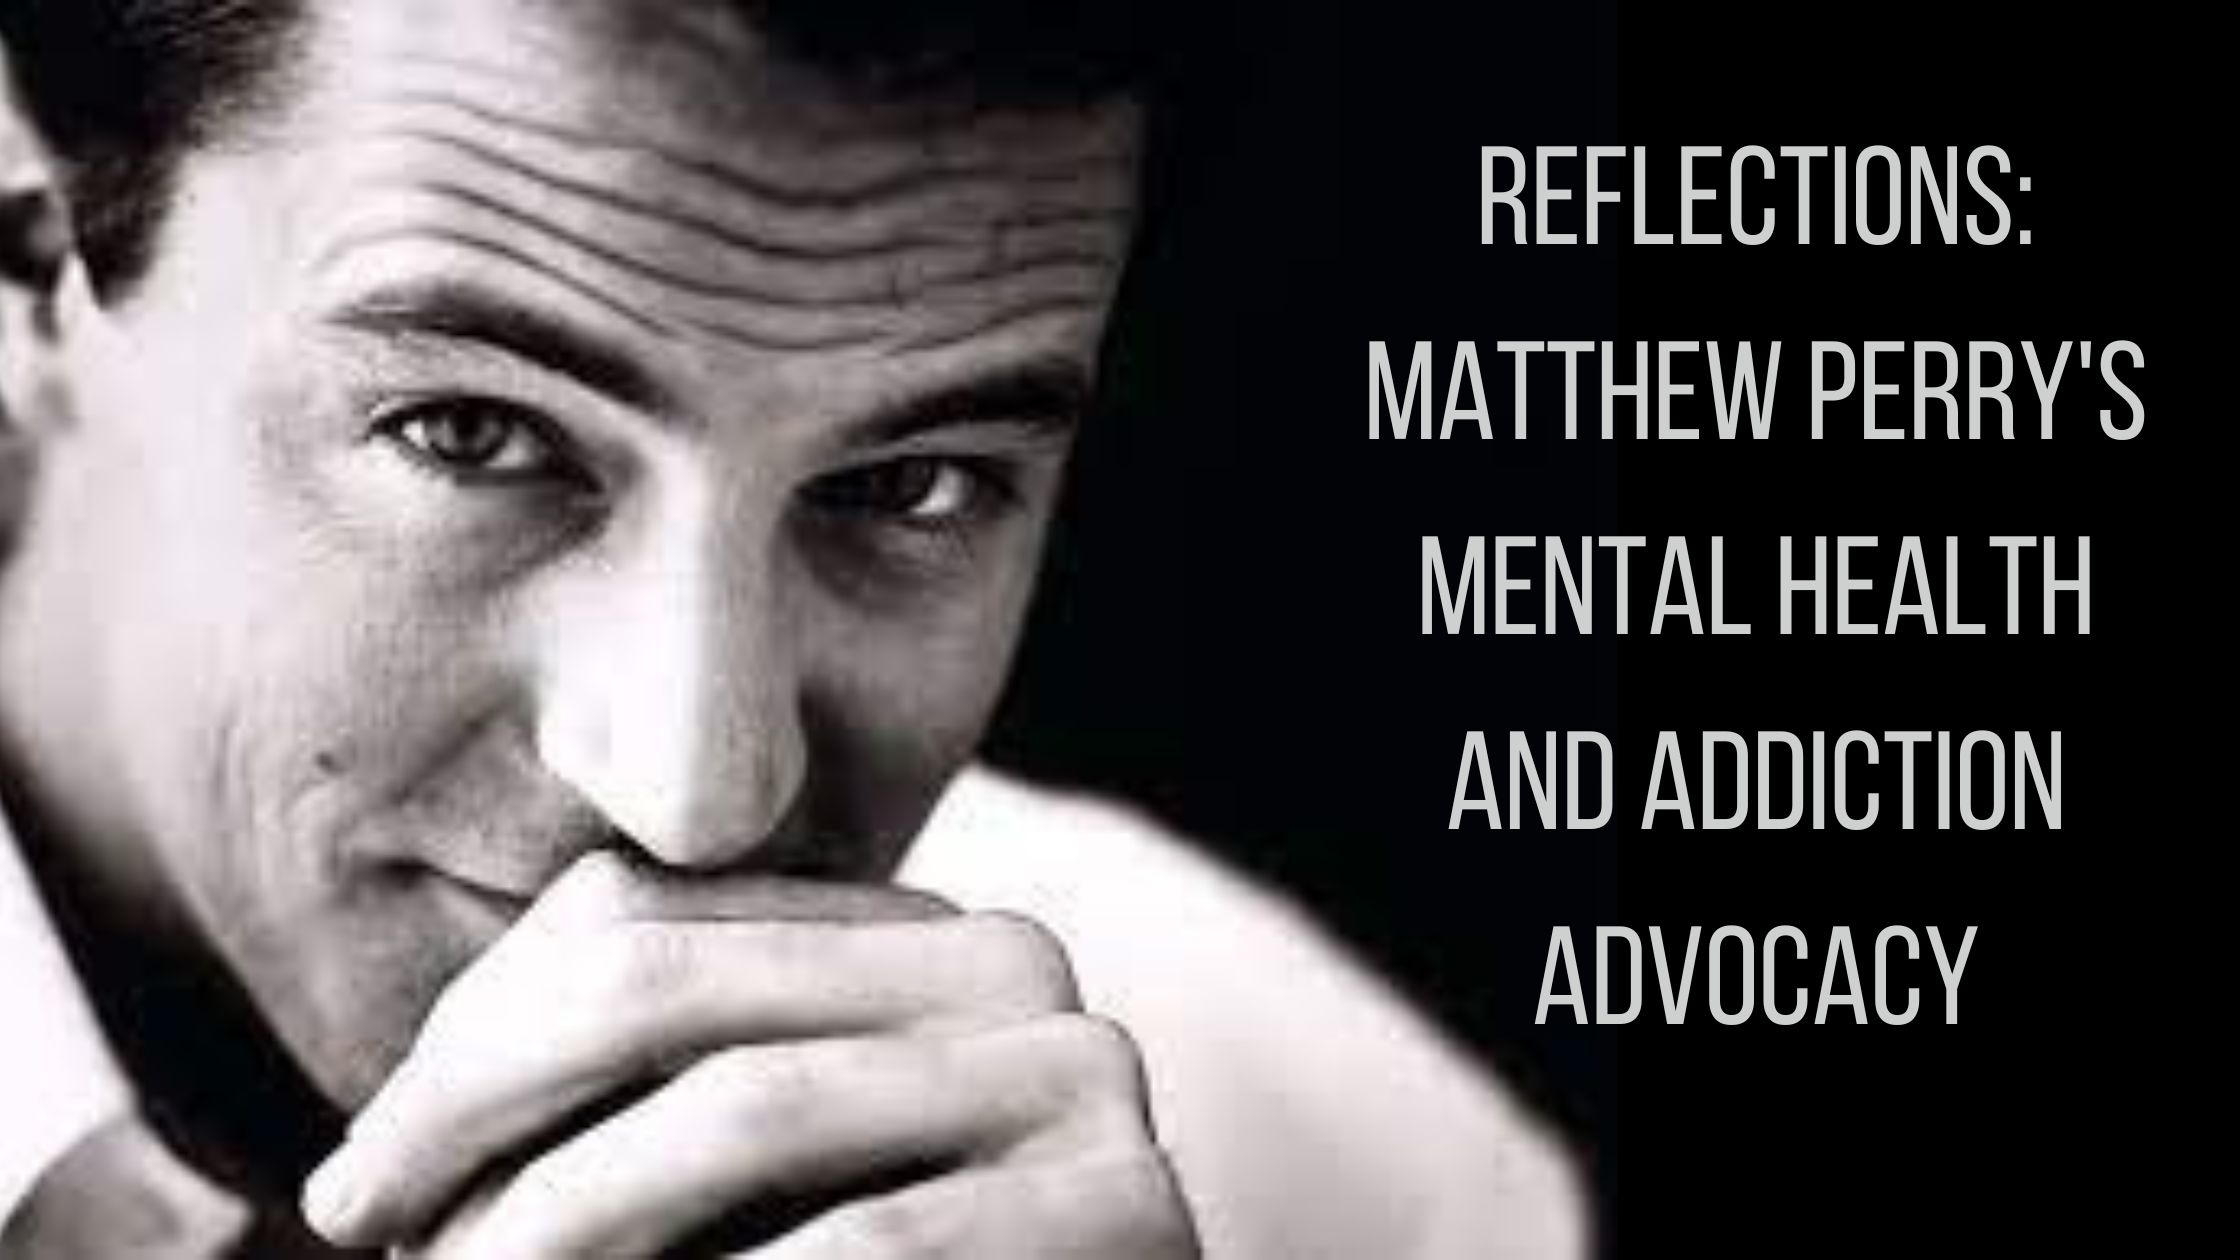 Reflections: Matthew Perry’s mental health and addiction advocacy